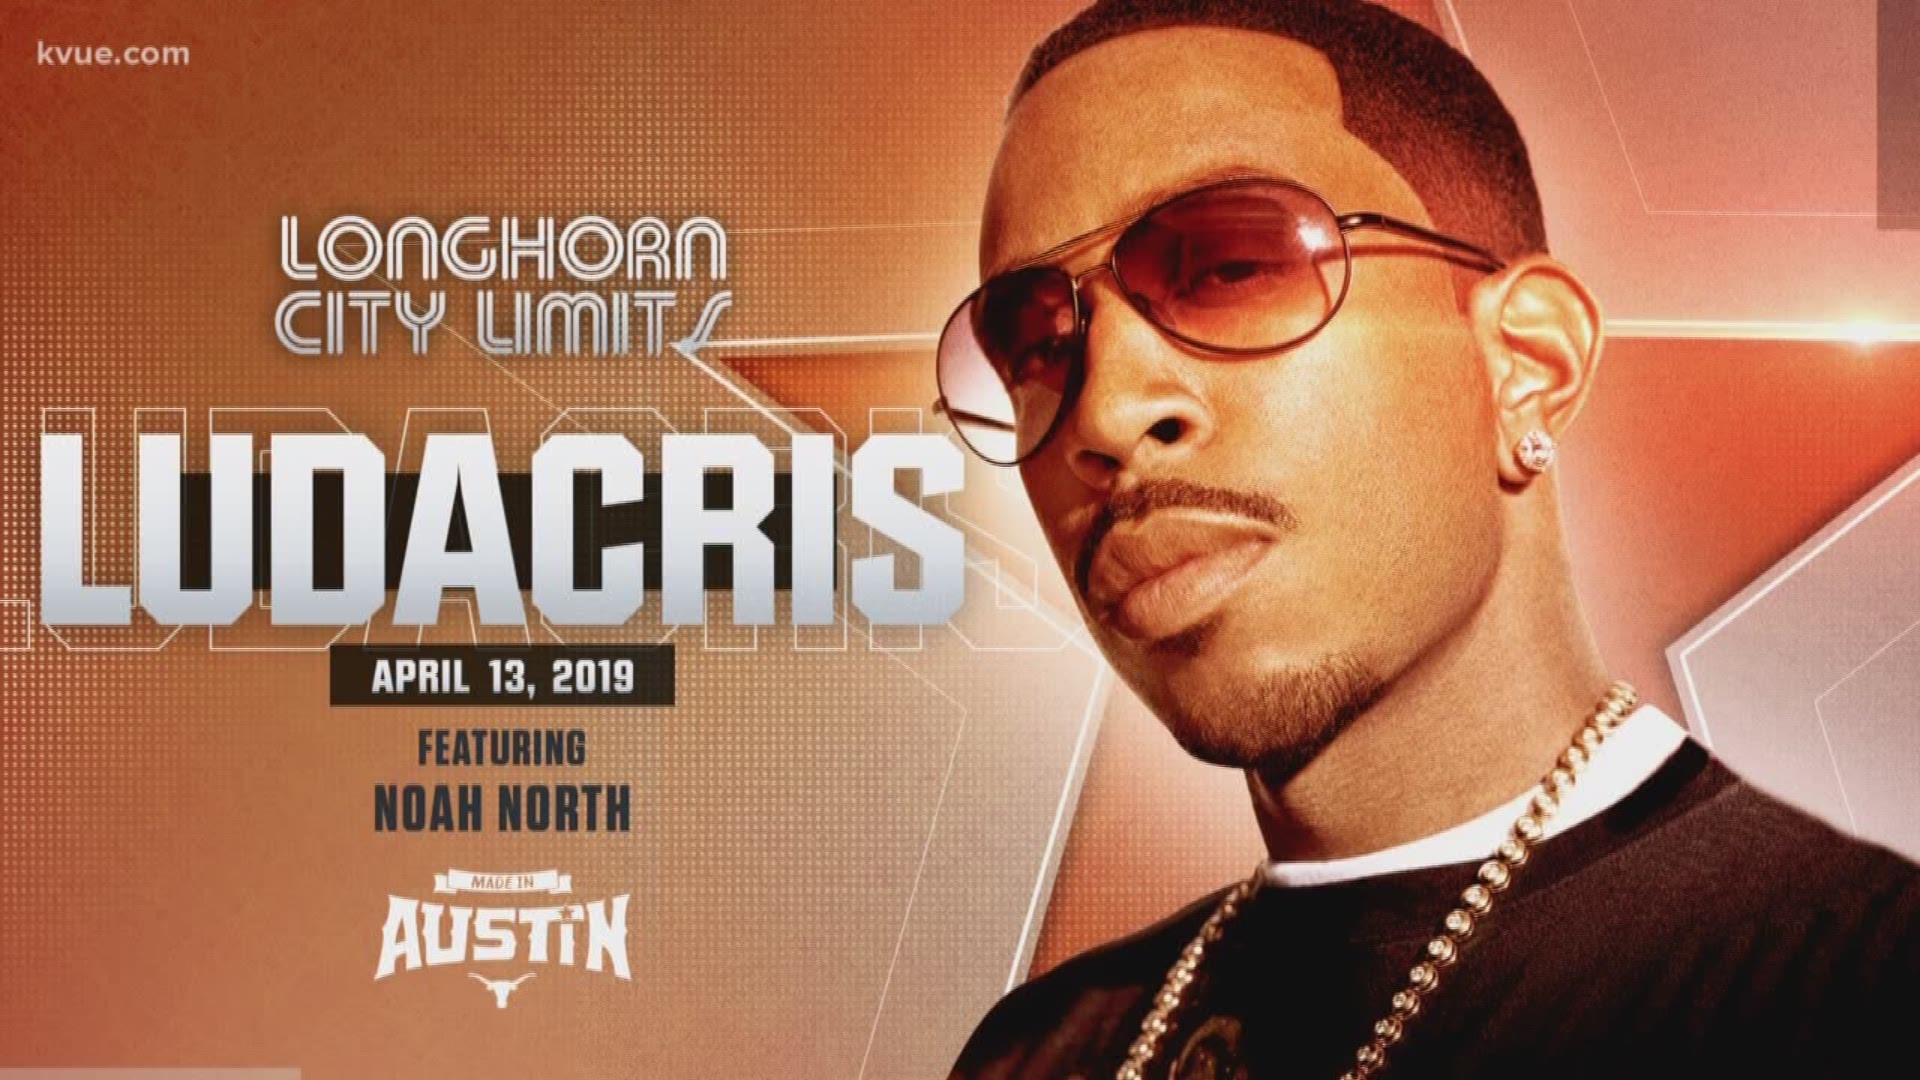 Texas Athletics announced that rapper/actor Ludacris will be the headlining act of 'Longhorn City Limits' on April 13.